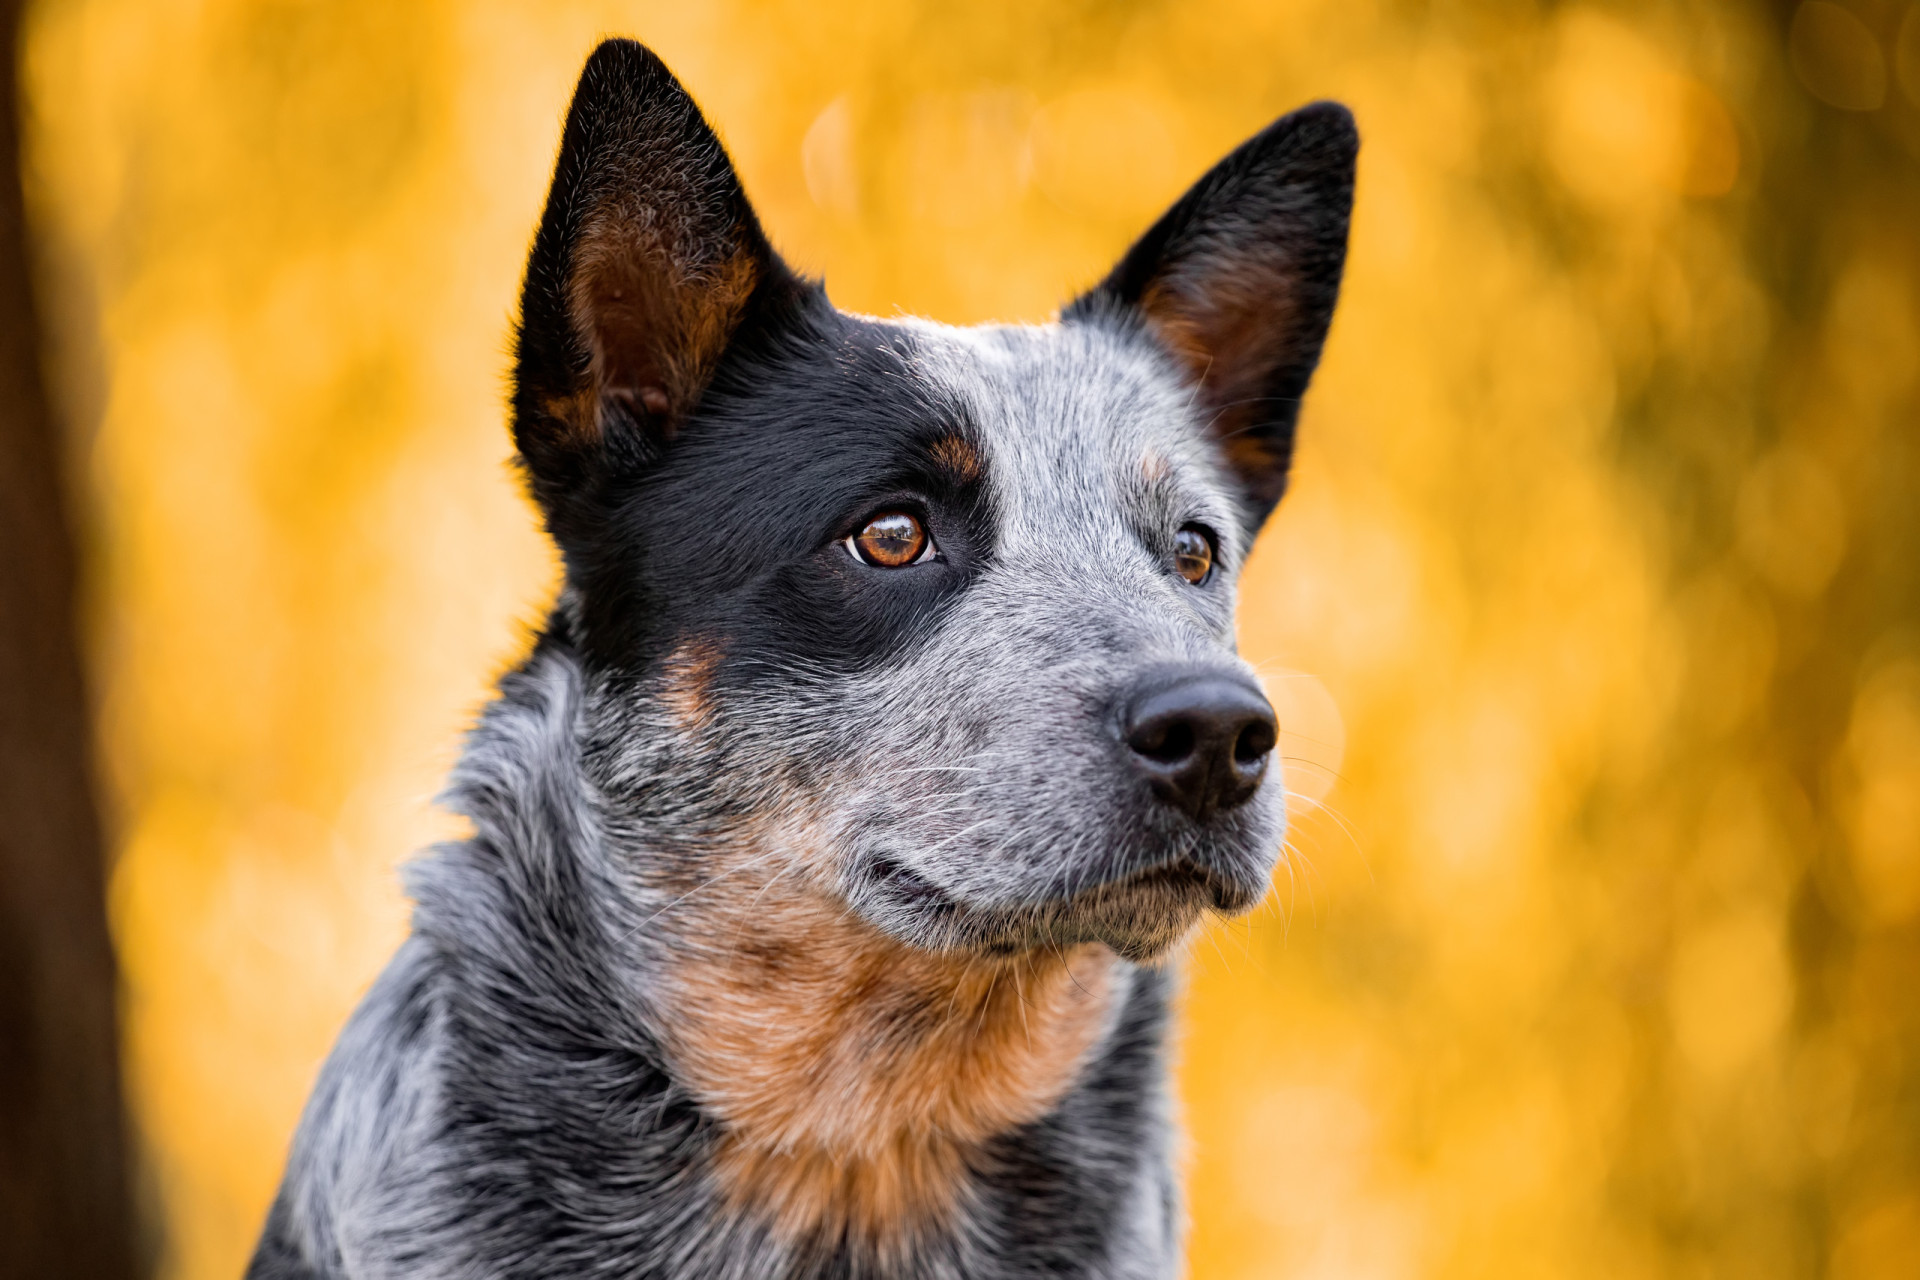 <p>This energetic breed is well-known for its intelligence, agility, and stamina. Plus, they're super friendly! Their life expectancy is from 13 to 15 years. </p><p>You may also like:<a href="https://www.starsinsider.com/n/503165?utm_source=msn.com&utm_medium=display&utm_campaign=referral_description&utm_content=605595en-us"> Russia's greatest military defeats</a></p>